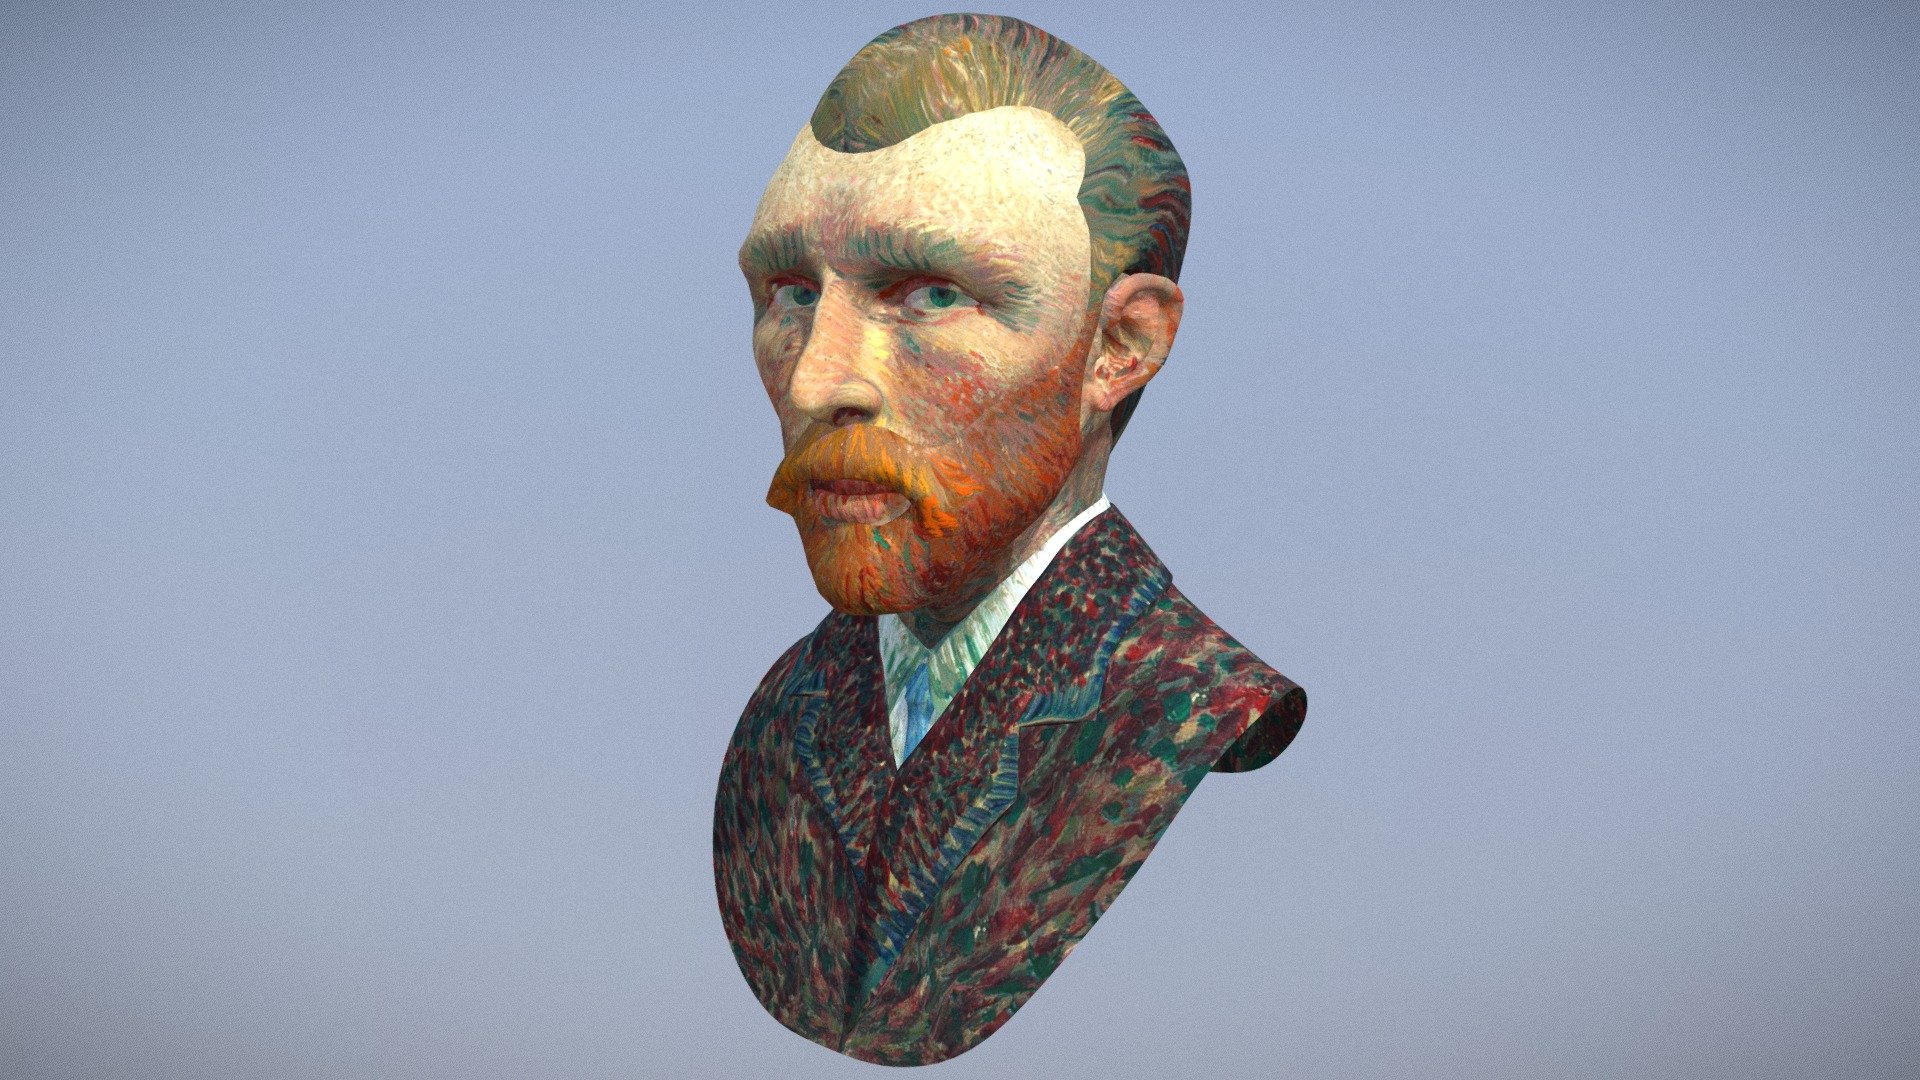 Vincent Van Gogh, based on a self-portrait, and textured using his painting technique. This is my first &lsquo;organic' ever so it was a steep learning curve, currently I've been using Blender for 4 months and it's my first time with 3D software.

I've purposefully made one ear uneven as Vincent had cut off his ear with a razor blade towards the end of his life. I found a doctor's note which details how his ear looked so it's as accurate as I can get it.

It's slightly surreal to experience this portrait in 3D and get a real life-like sense of the man beyond just a single pose.

Hopefully I can get around to modeling more works of art and historical people 3d model